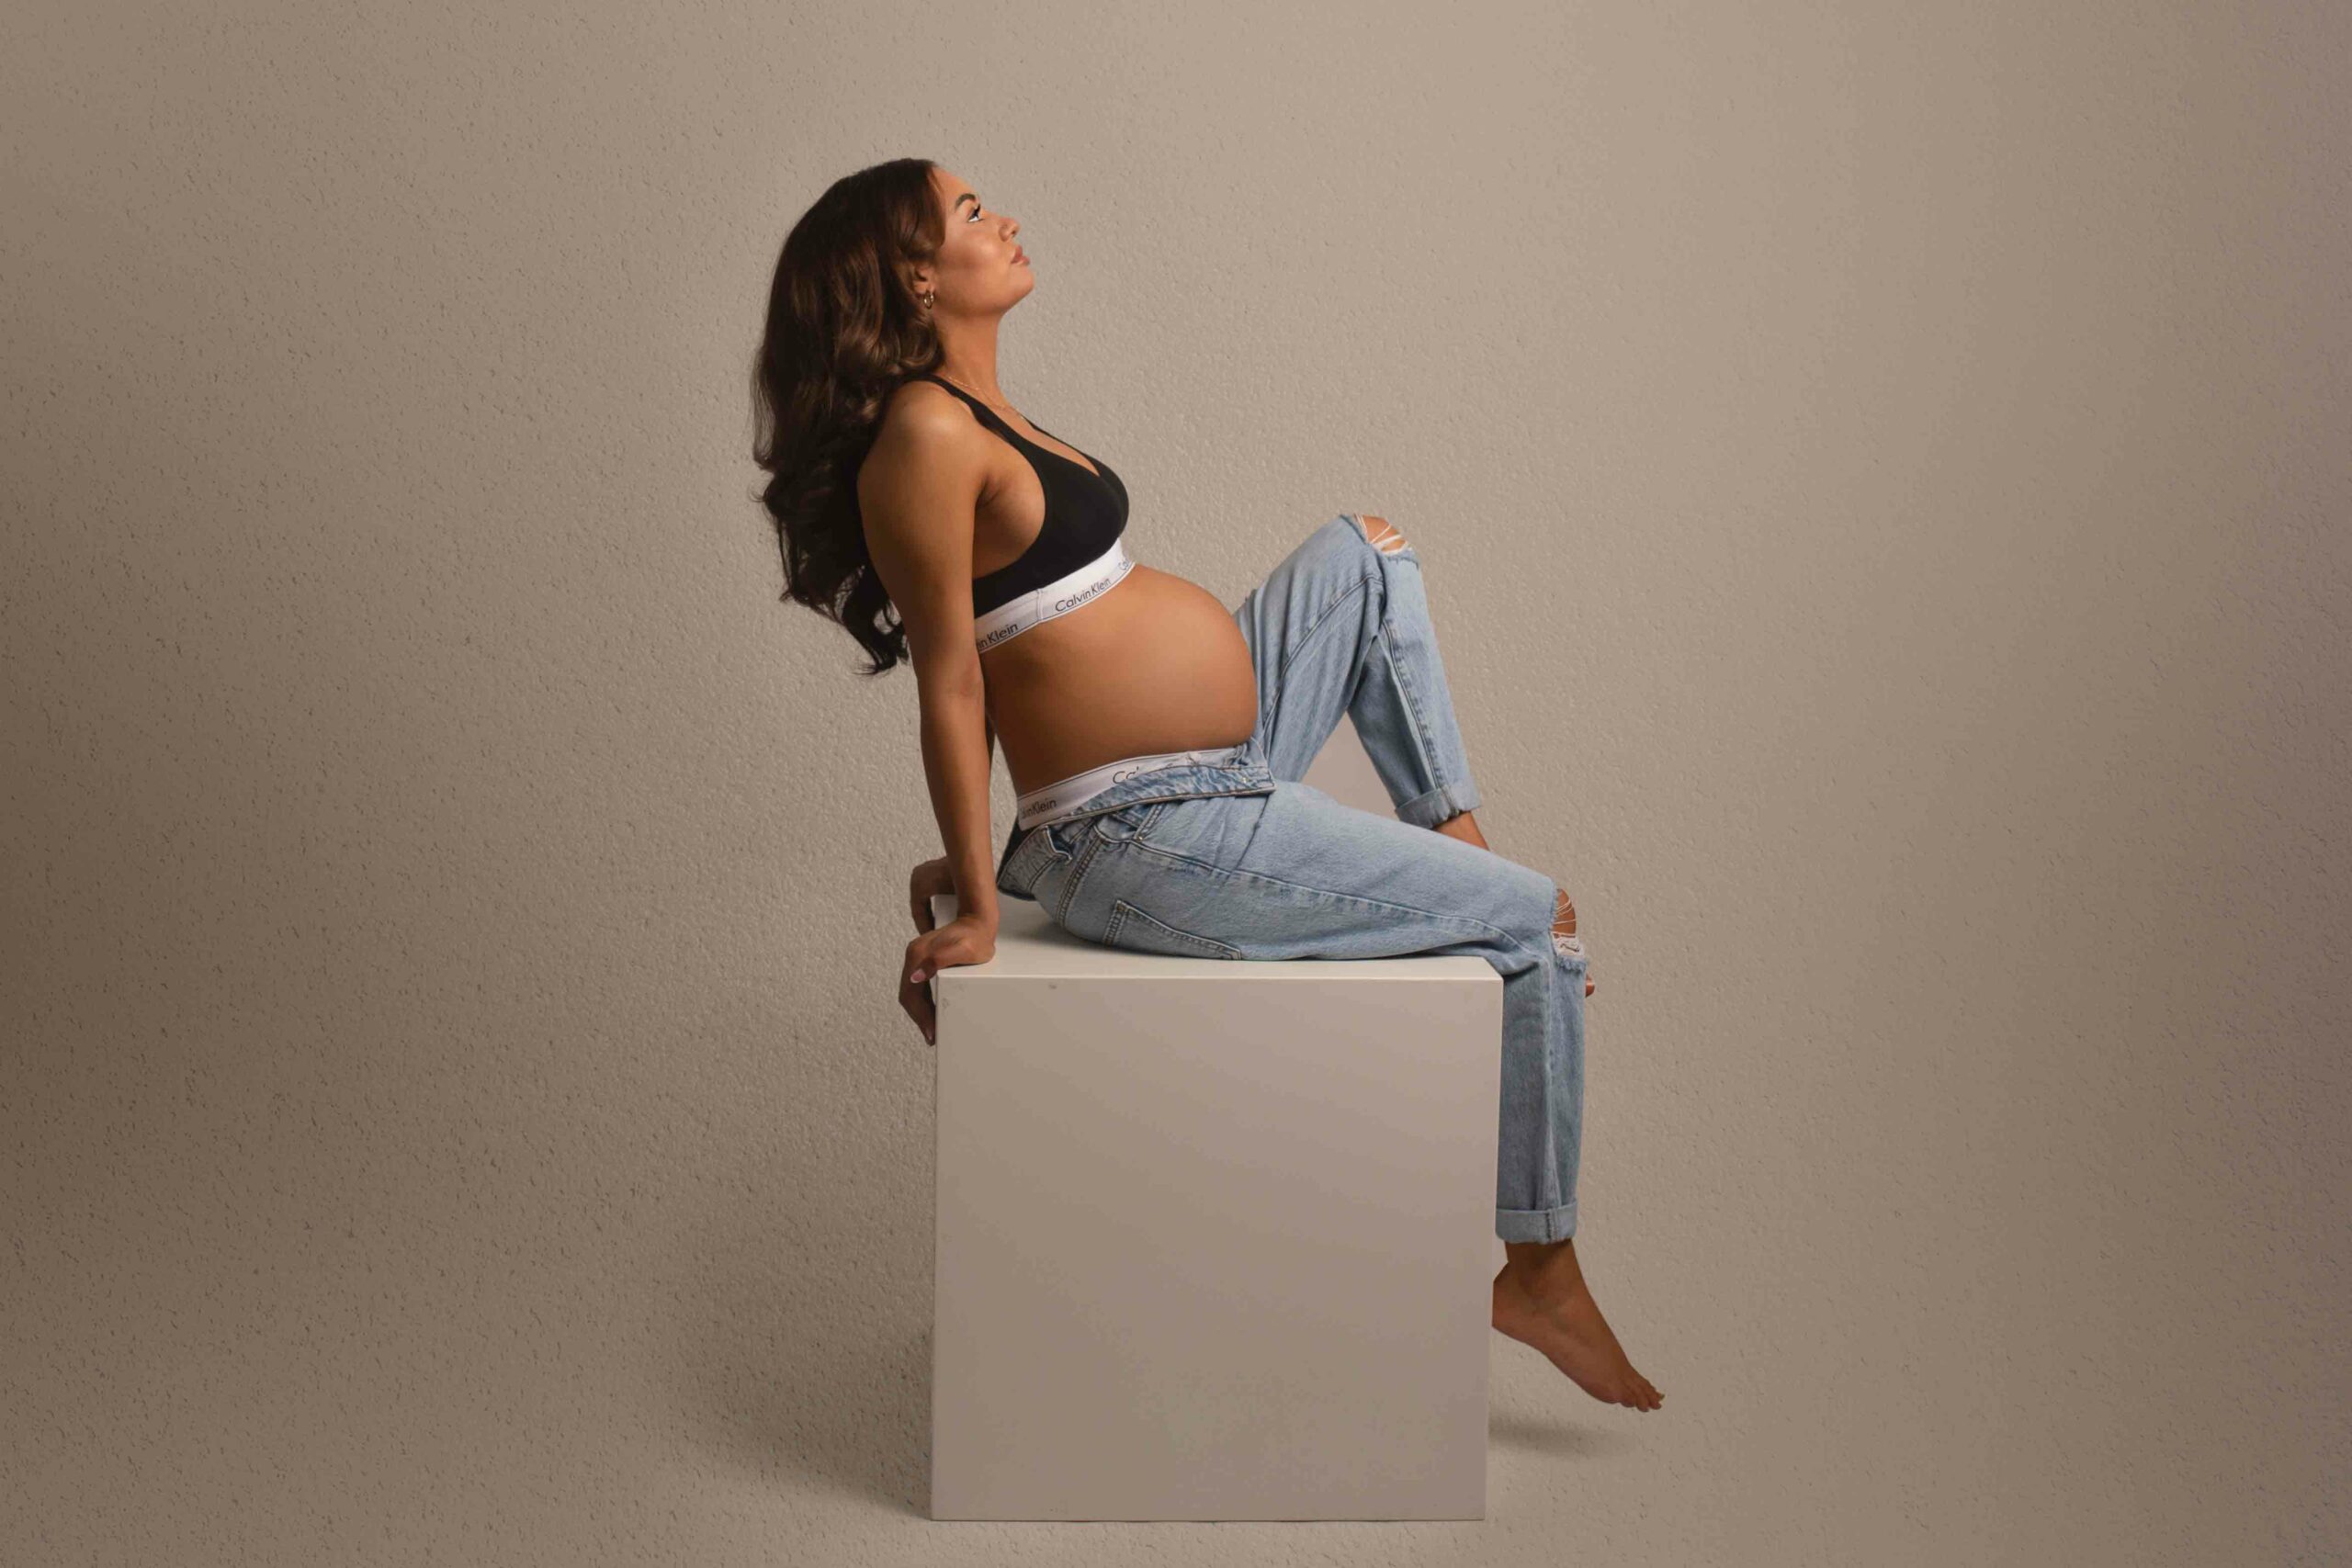 Pregnant mum photographed her maternity photos in jeans and black sports bra. Sitting on white block with one knee up. Photographed in my studio in Strood, Kent